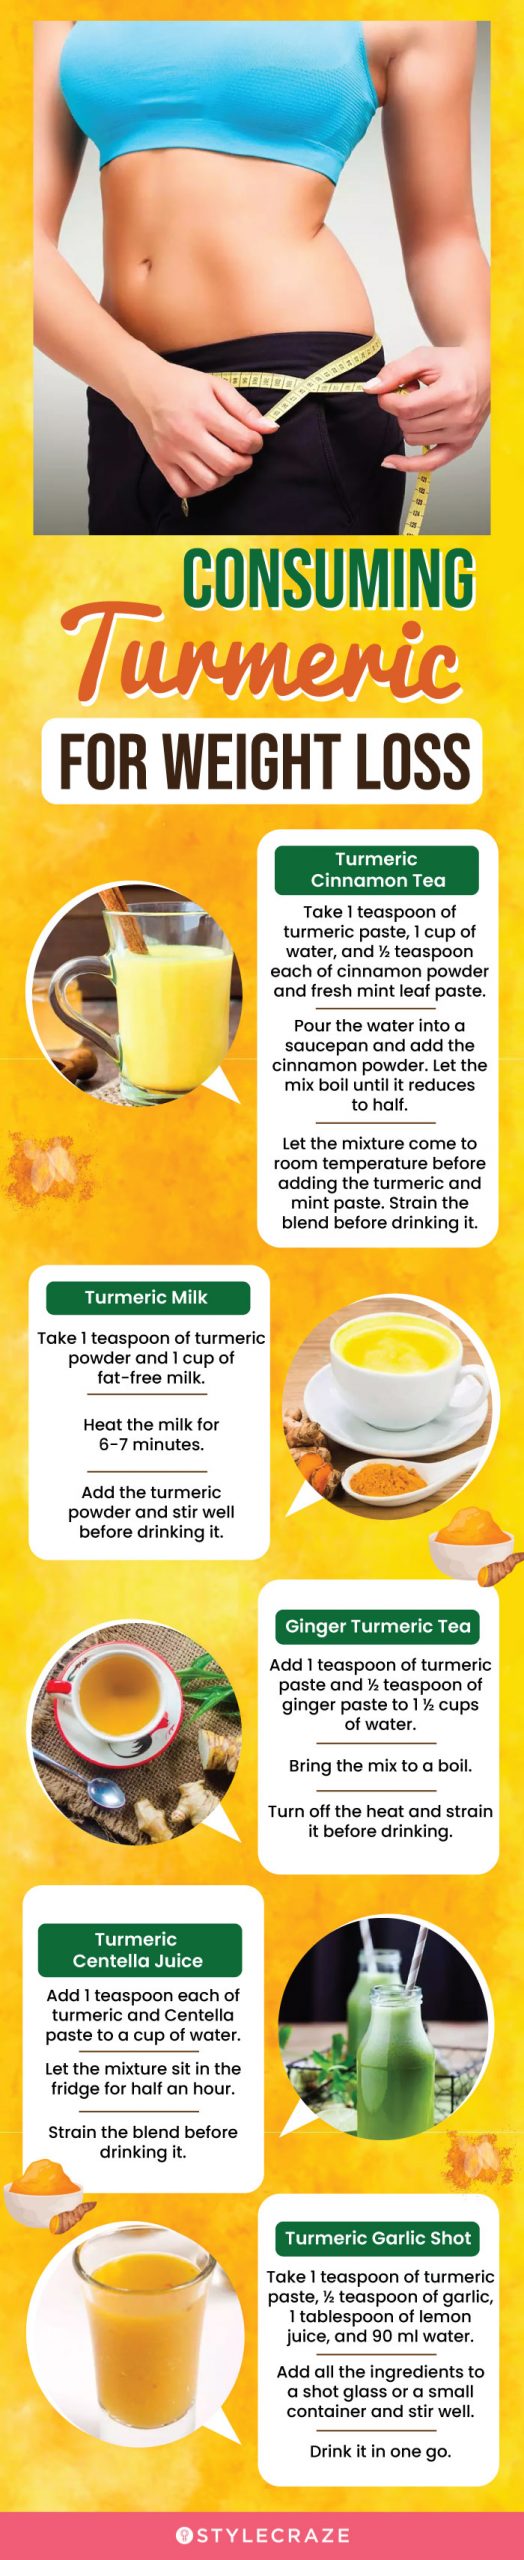 consuming turmeric for weight loss (infographic)